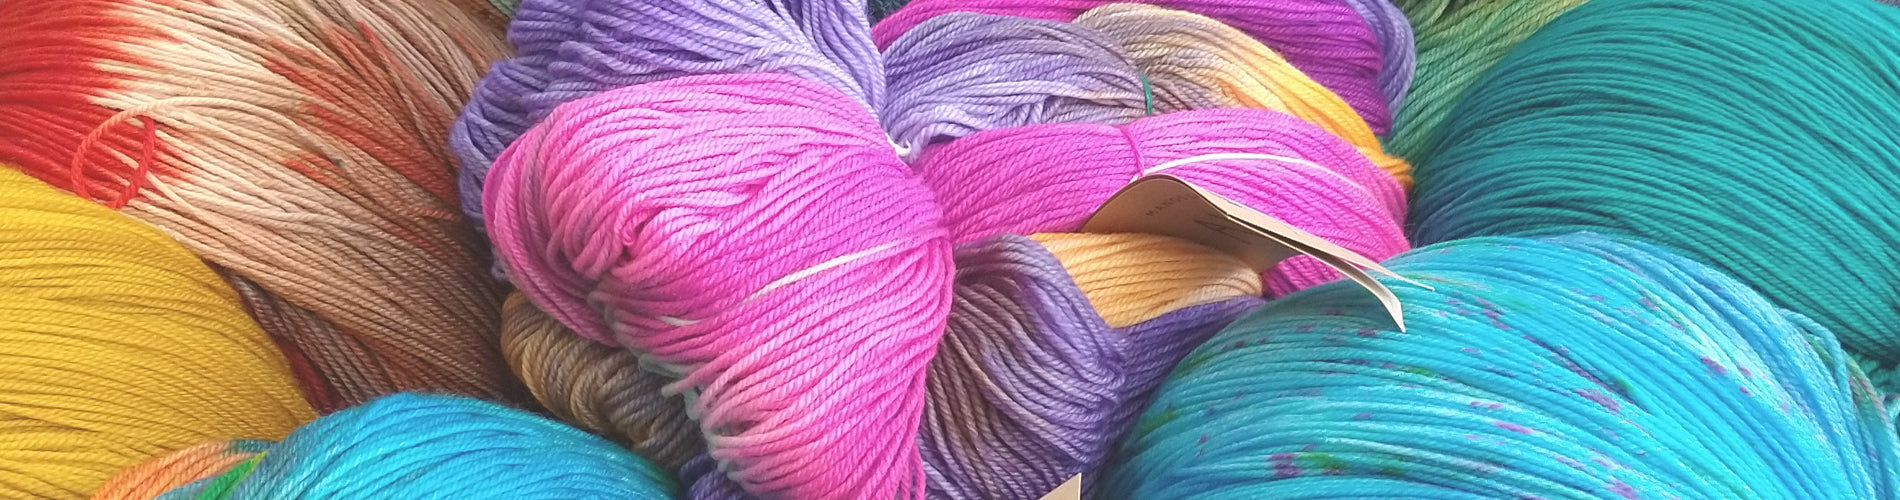 Colorful yarn in a pile